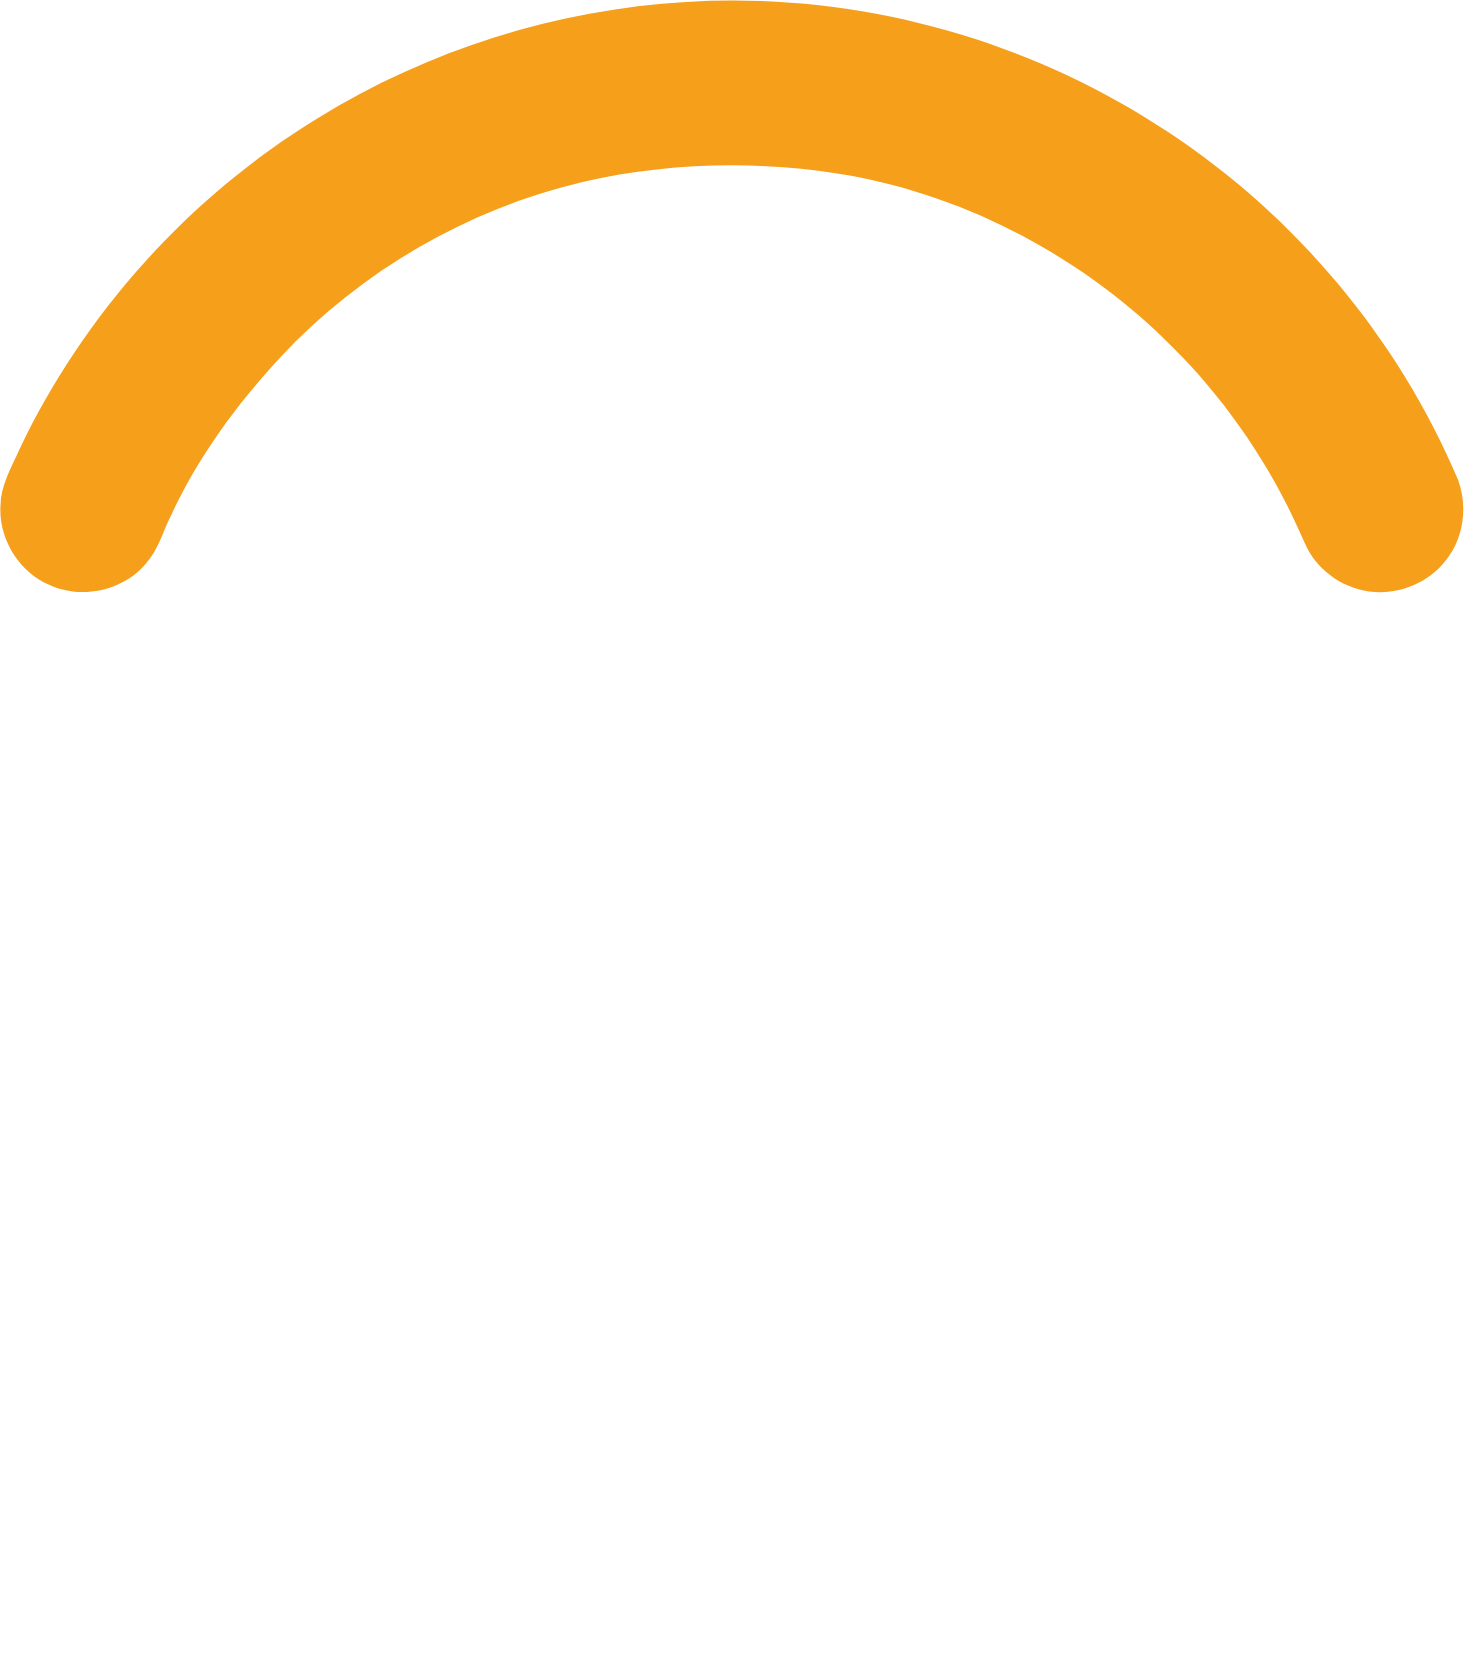 Workday logo pour fonds sombres (PNG transparent)